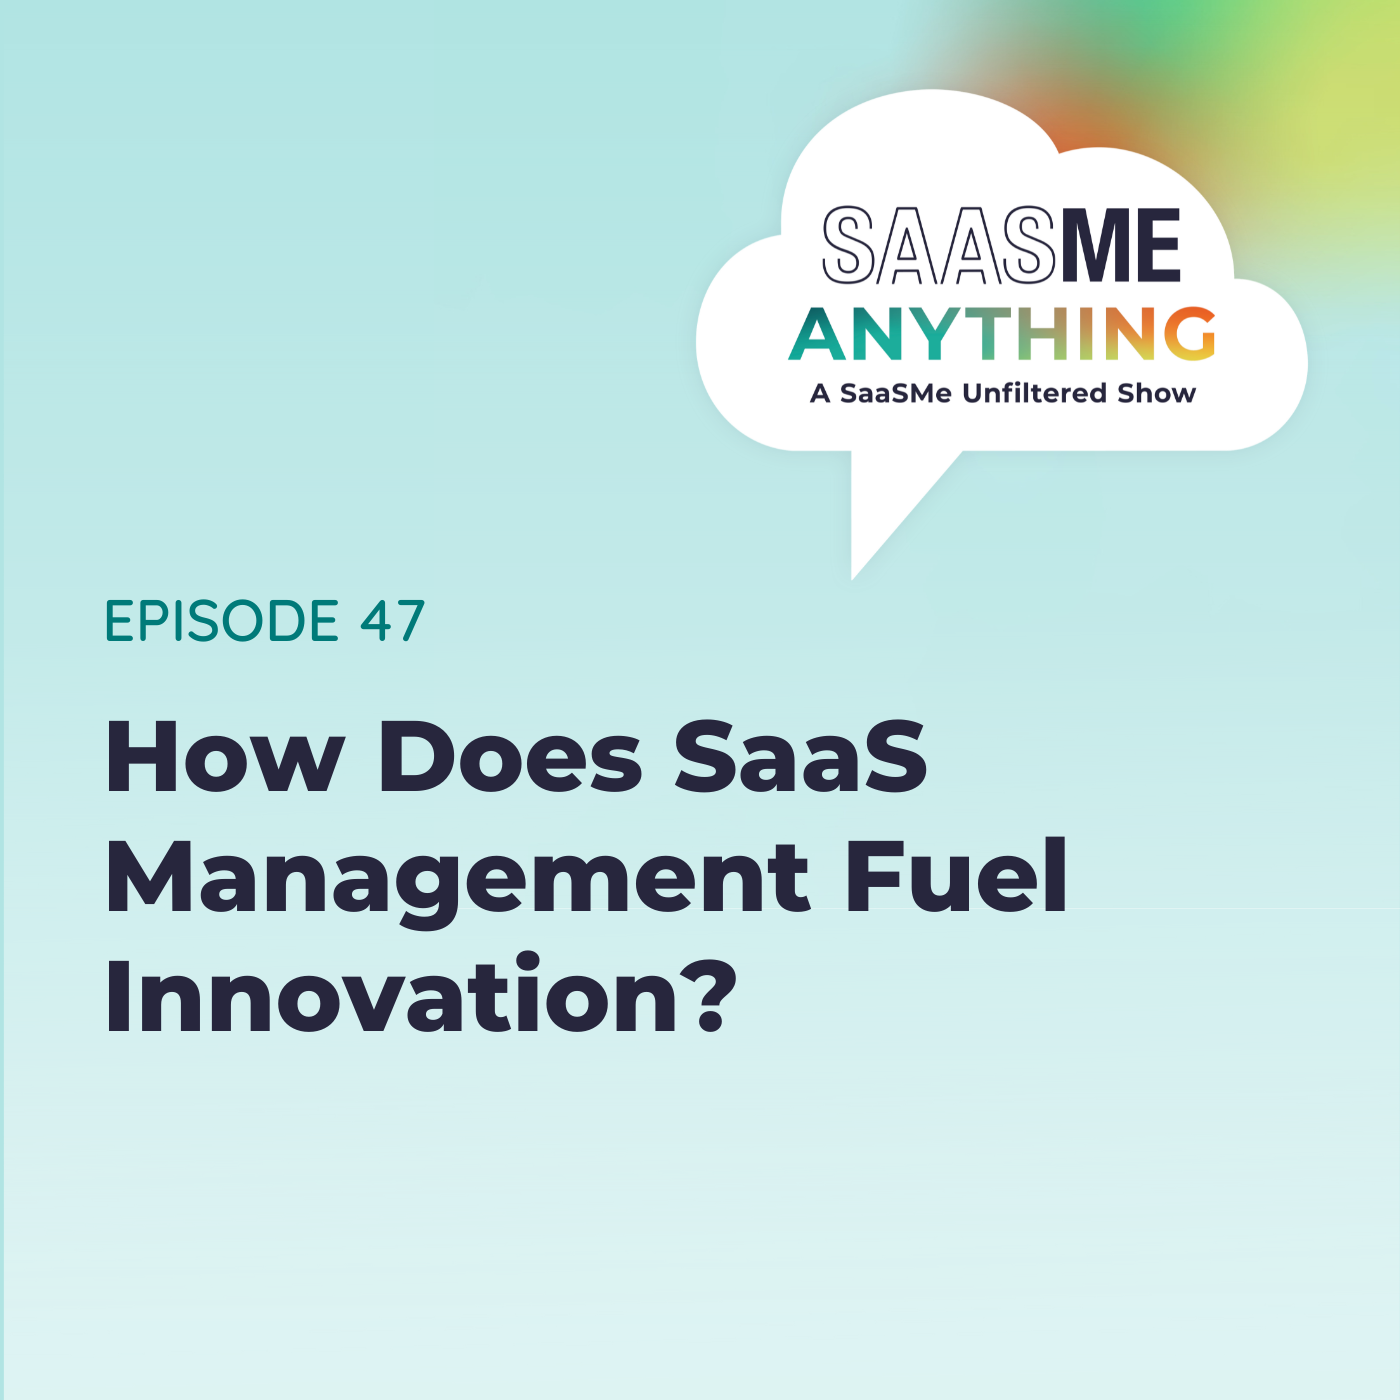 How Does SaaS Management Fuel Innovation?